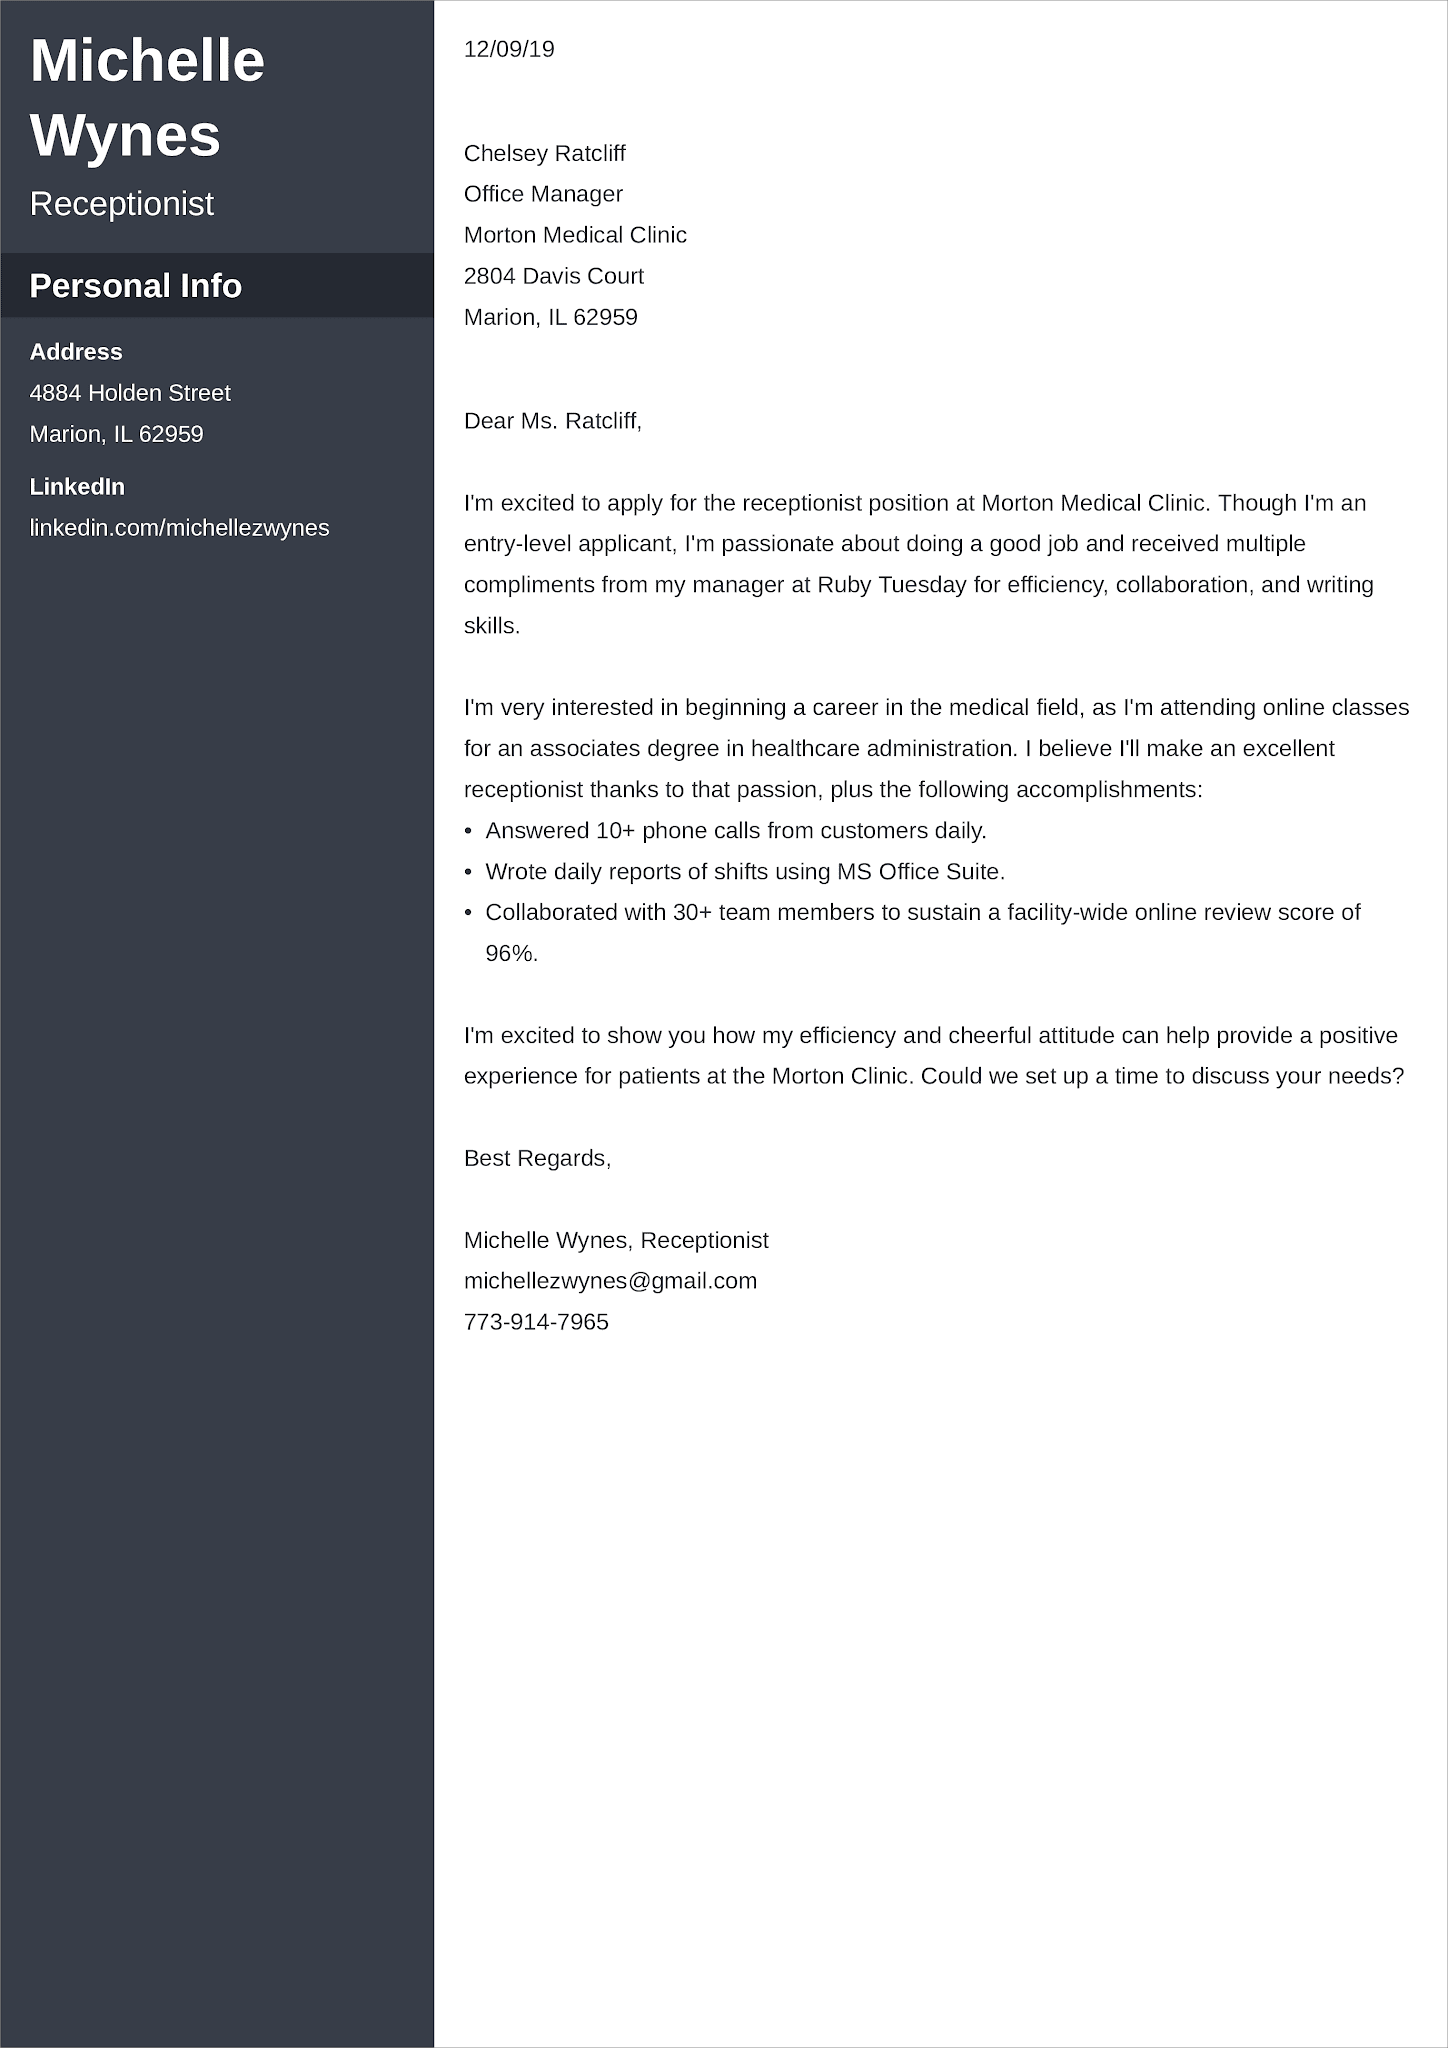 short application letter as a secretary without experience